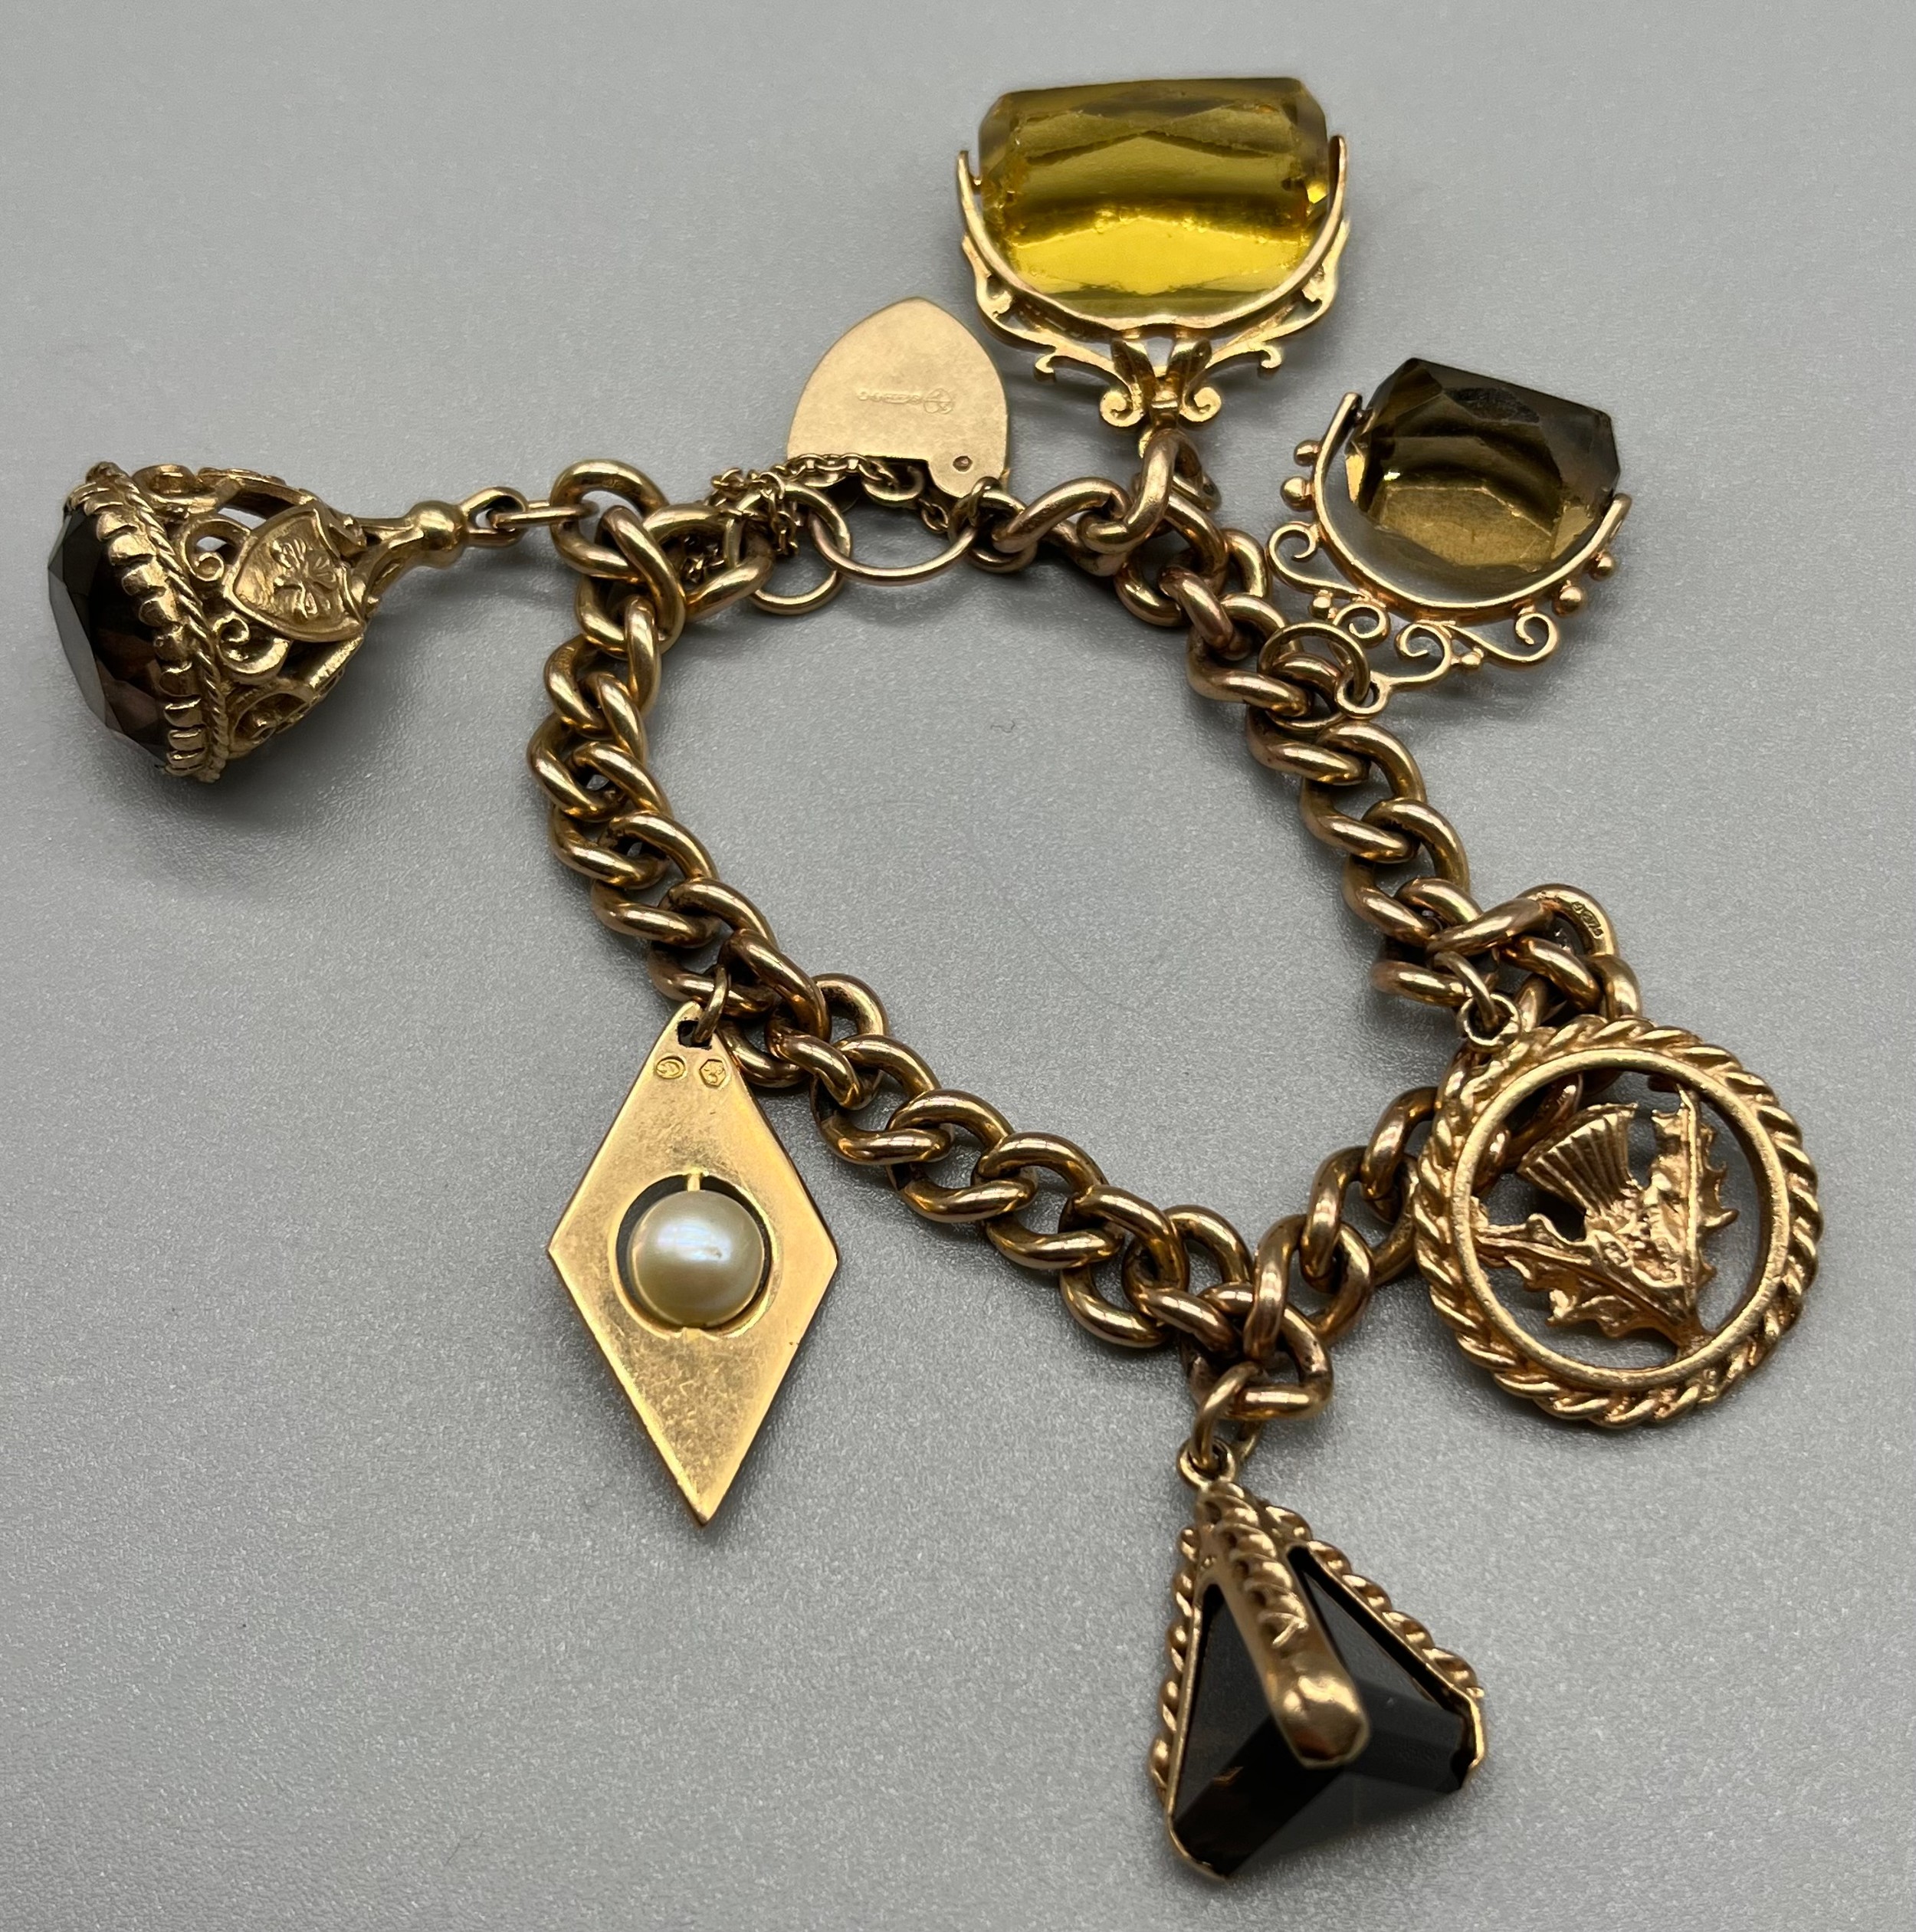 A 9ct gold charm bracelet, attached with various fob charms. [43.04grams] - Image 5 of 5